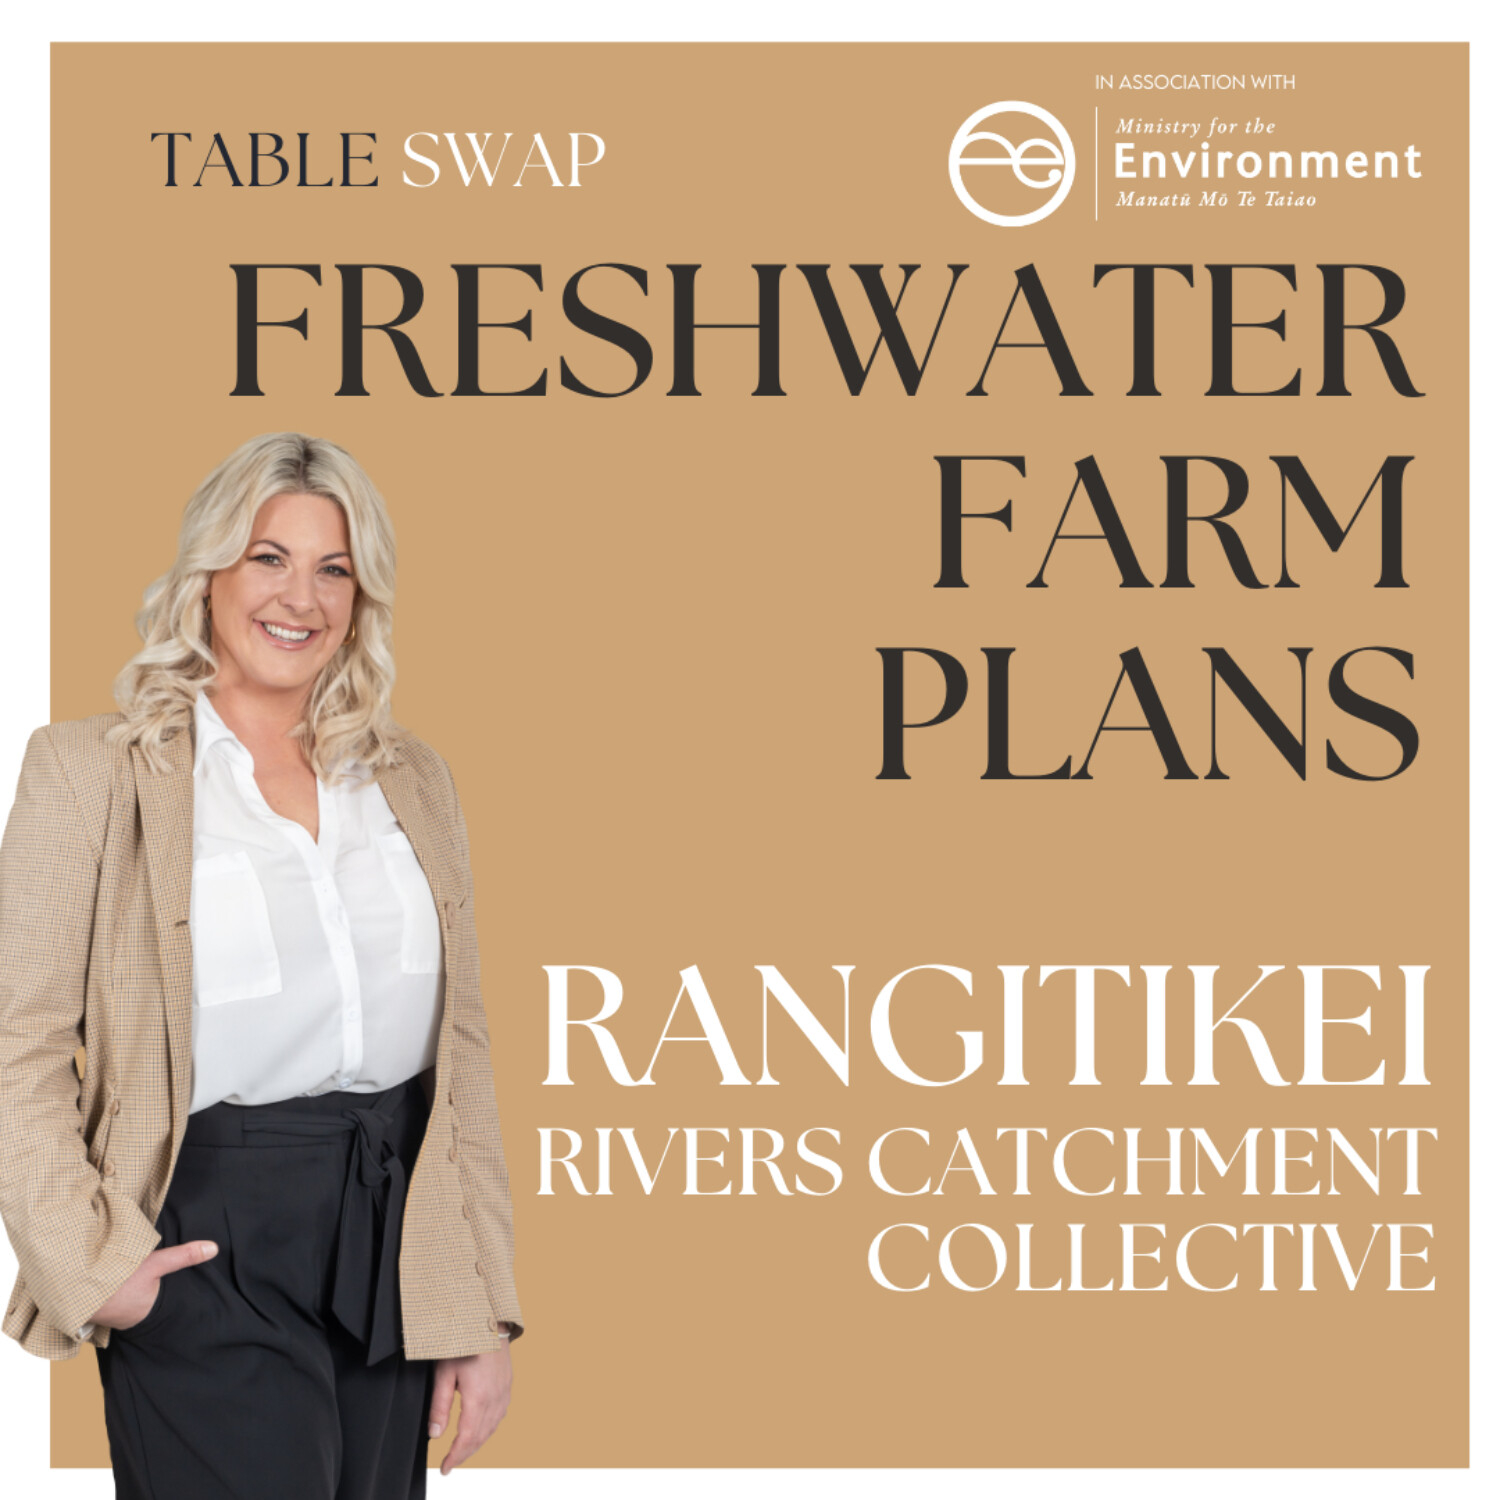 Leave it to the catchment communities to achieve freshwater outcomes. Rangitikei farmers meet the Ministry for the Environment